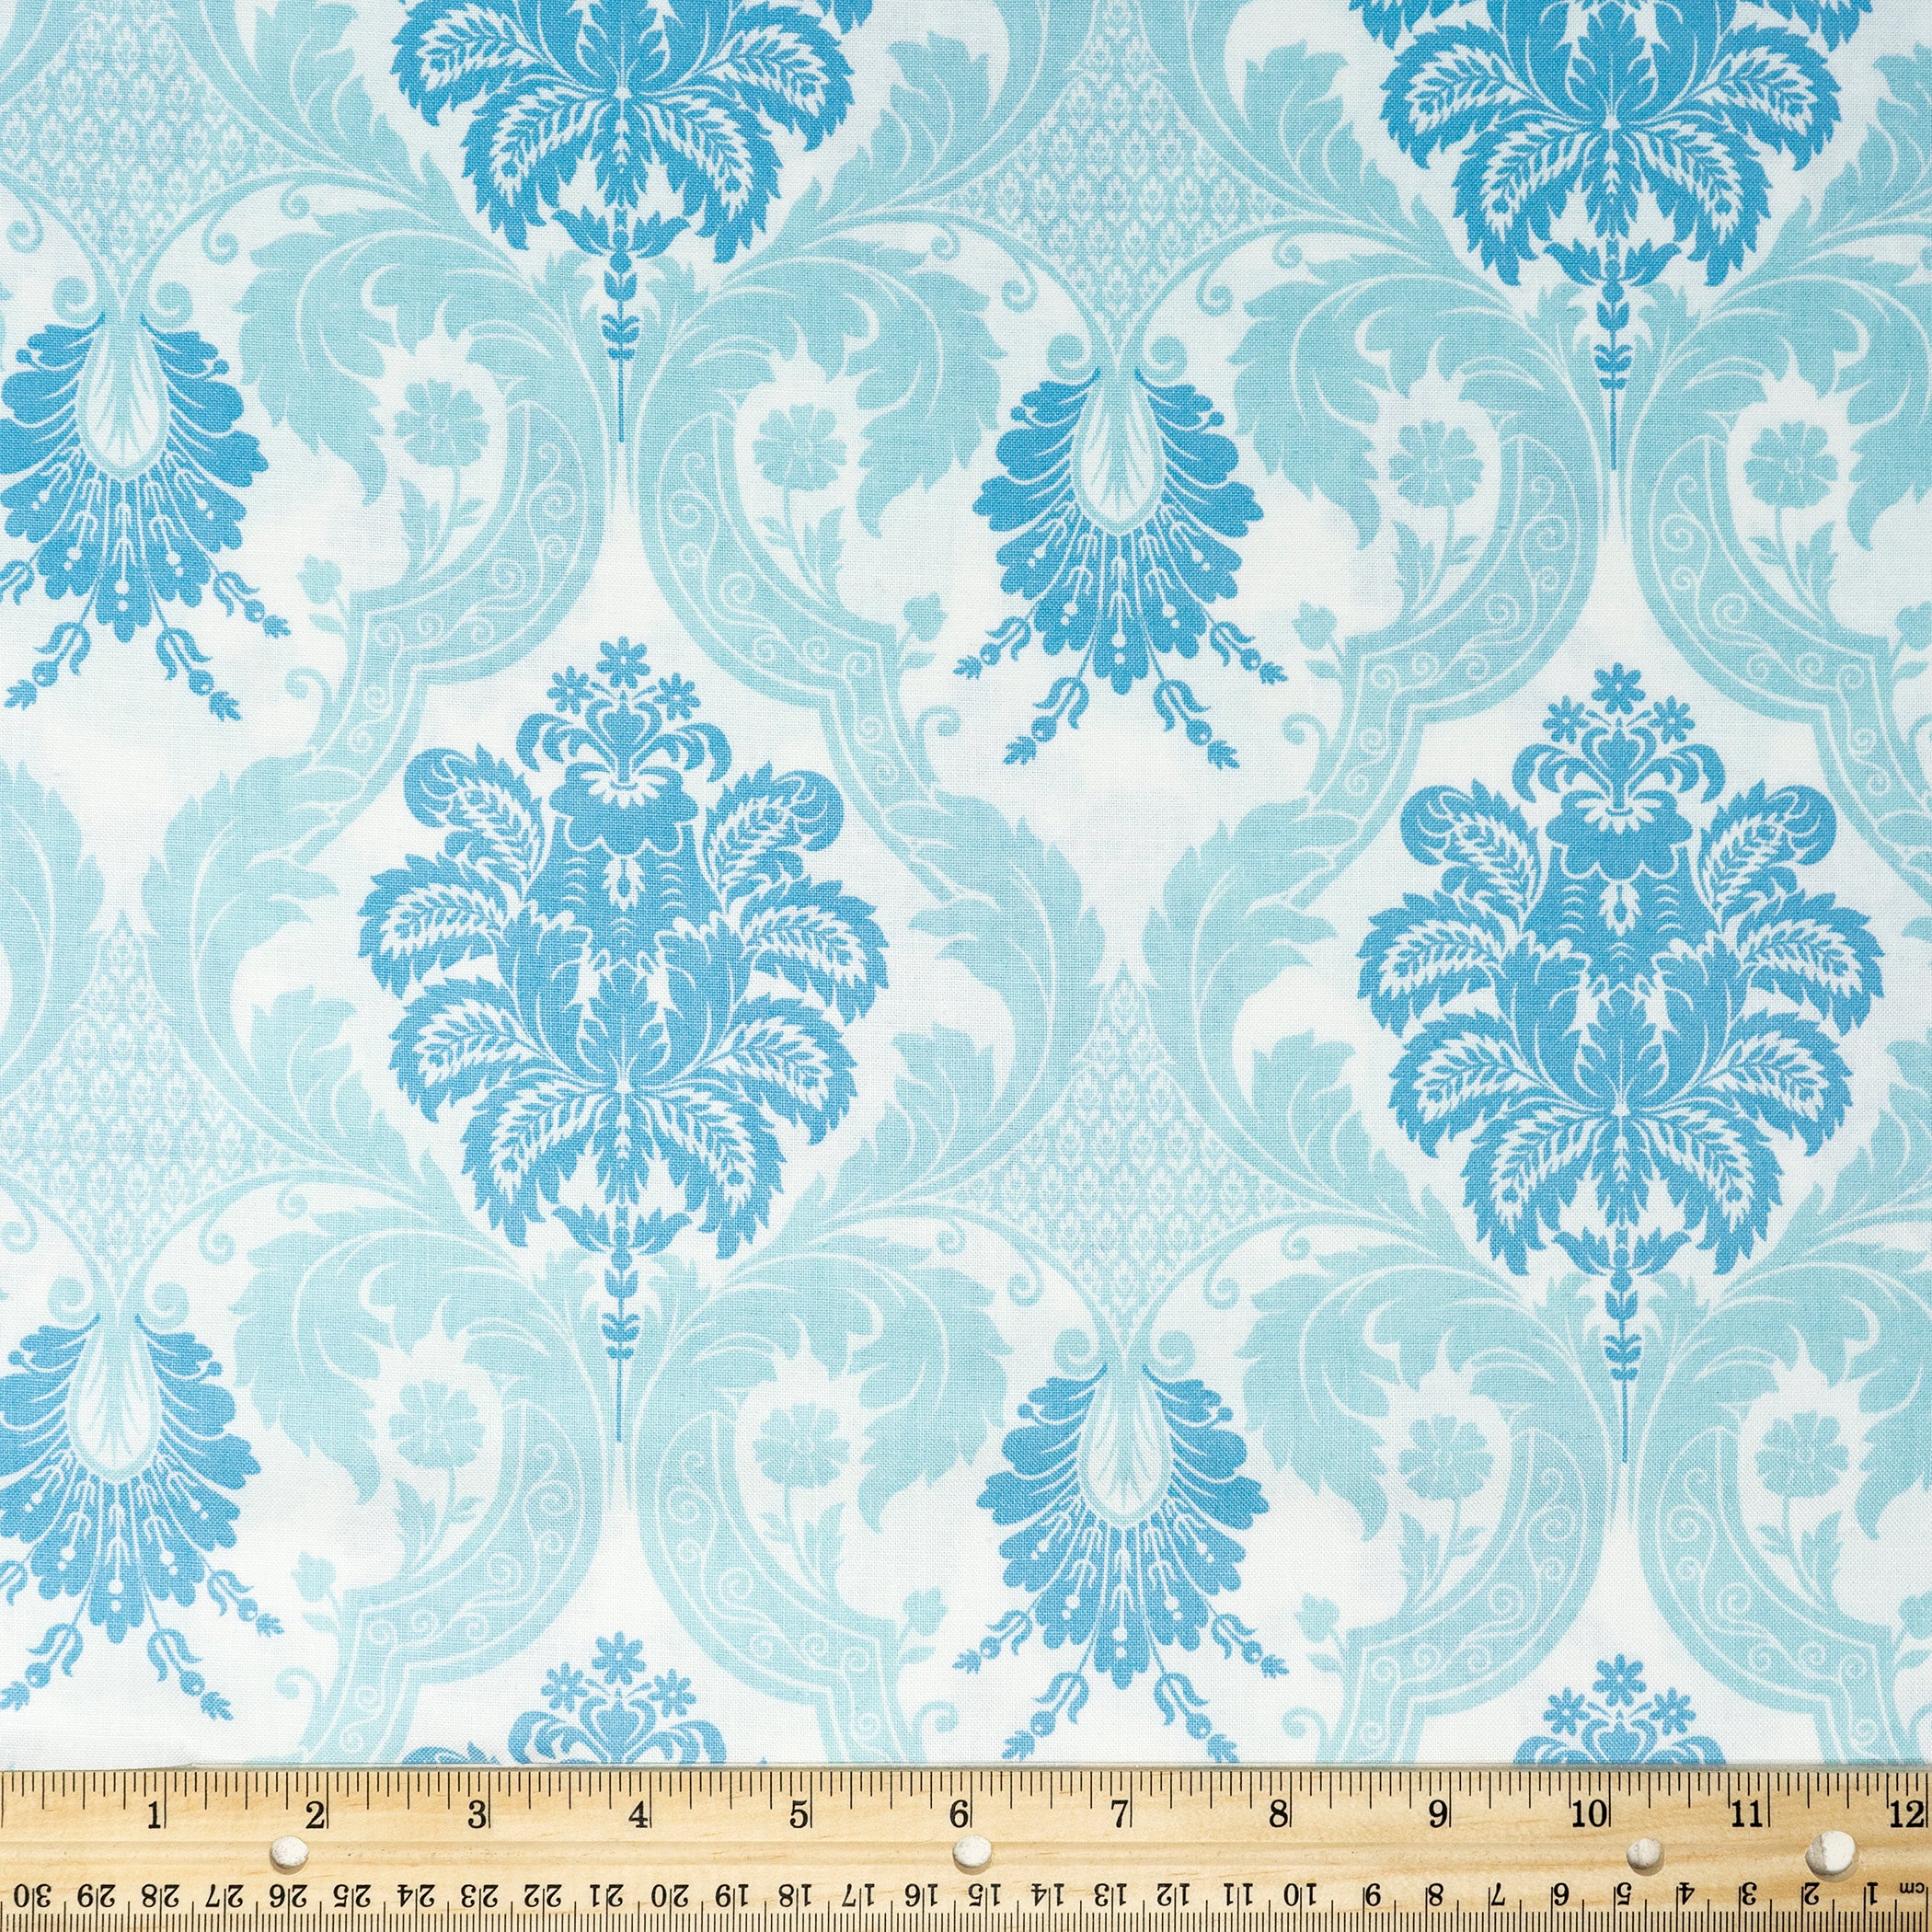 Waverly Inspirations Cotton 44" Damask 2 Glacier Color Sewing Fabric by the Yard